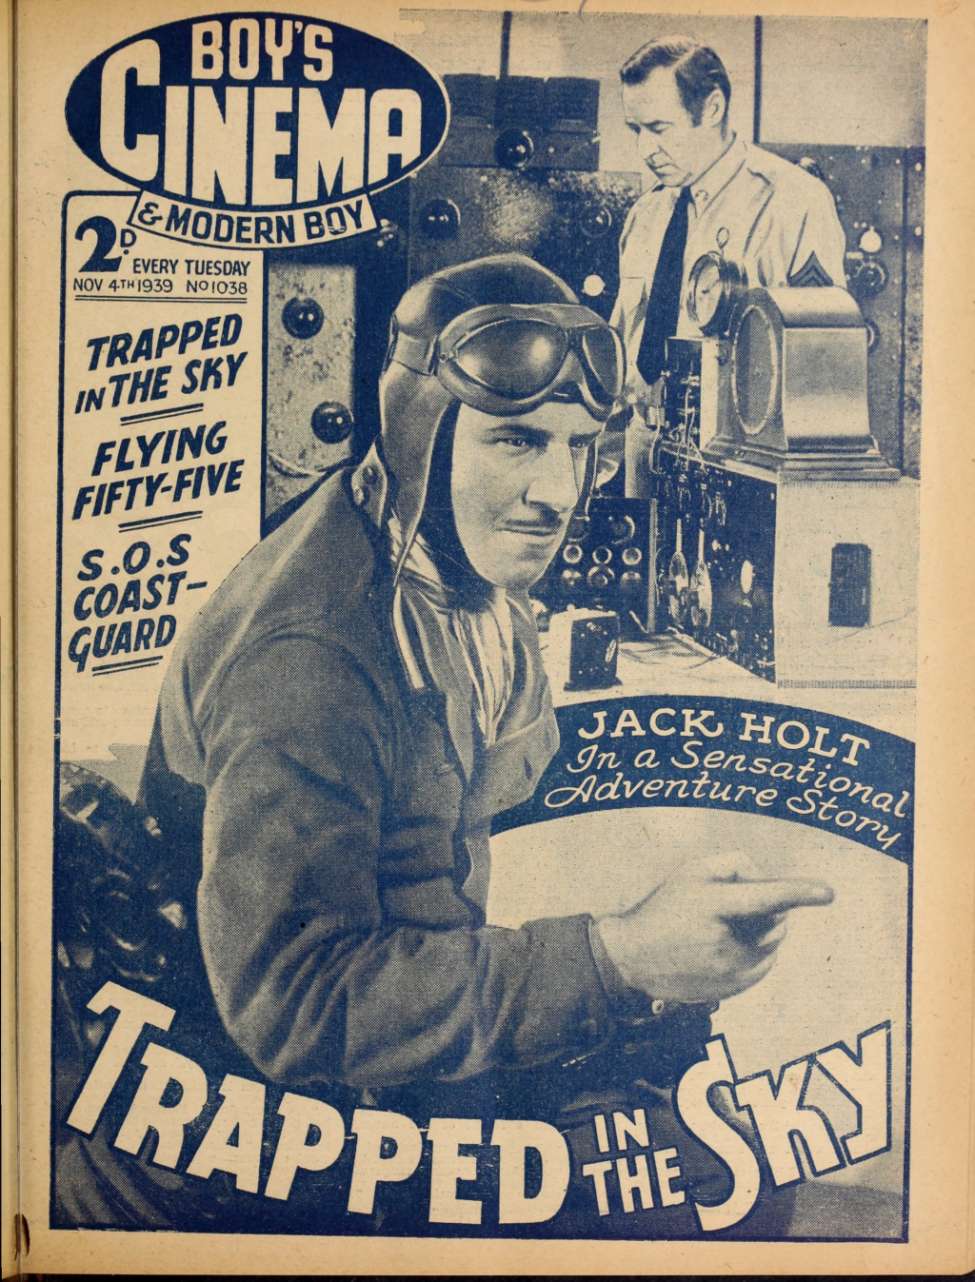 Book Cover For Boy's Cinema 1038 - Trapped in the Sky - Jack Holt